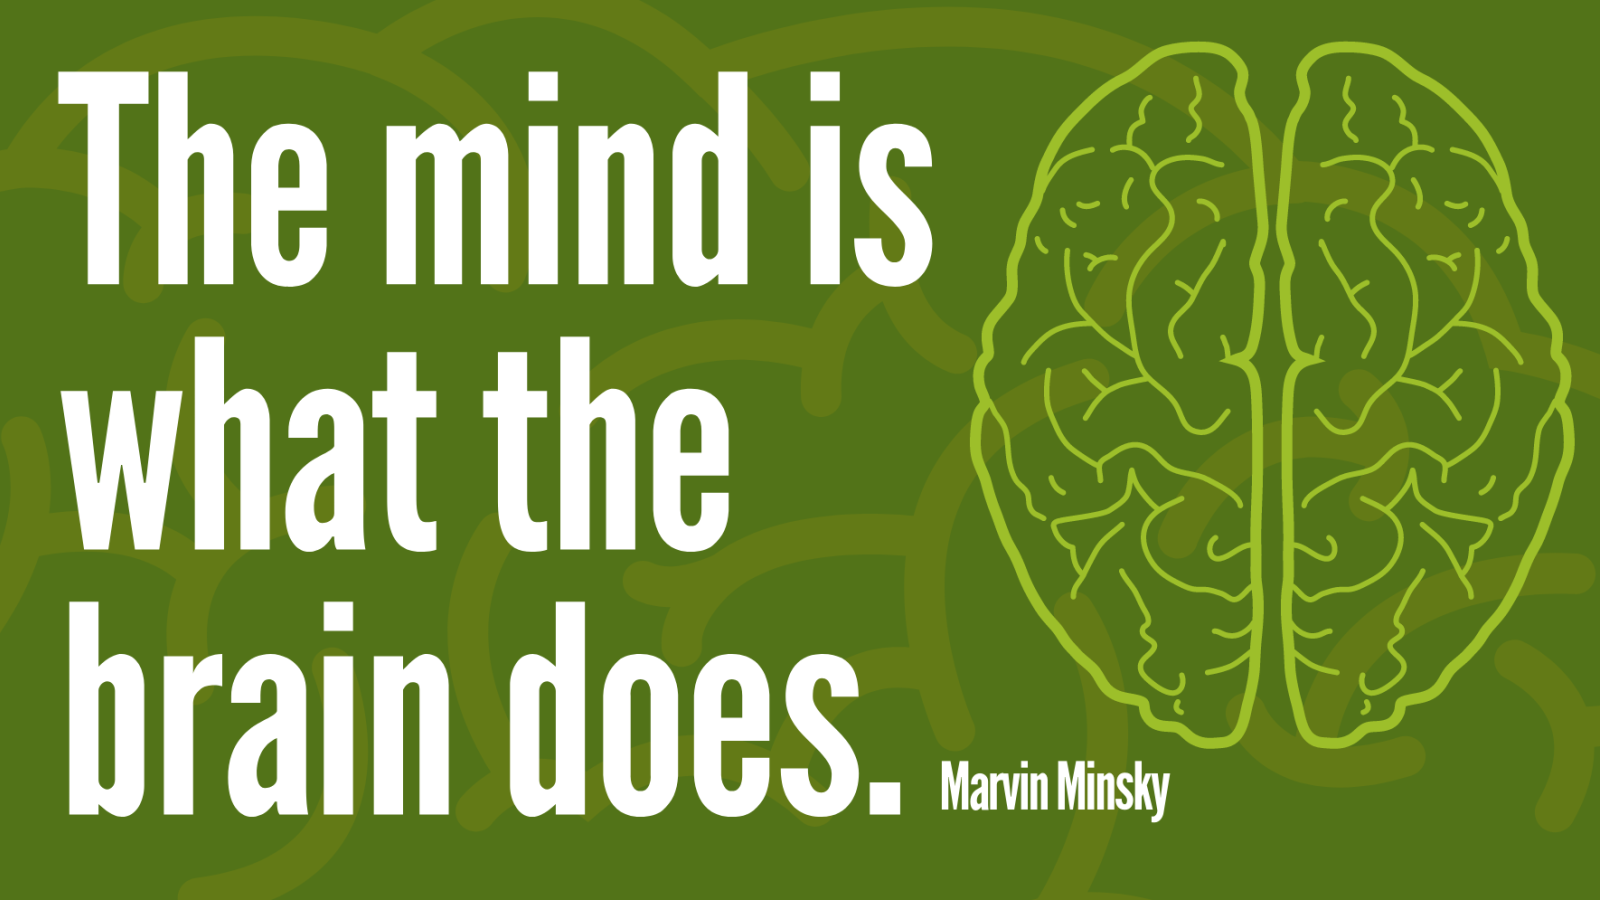 The mind is what the brain does. - Marvin Minsky